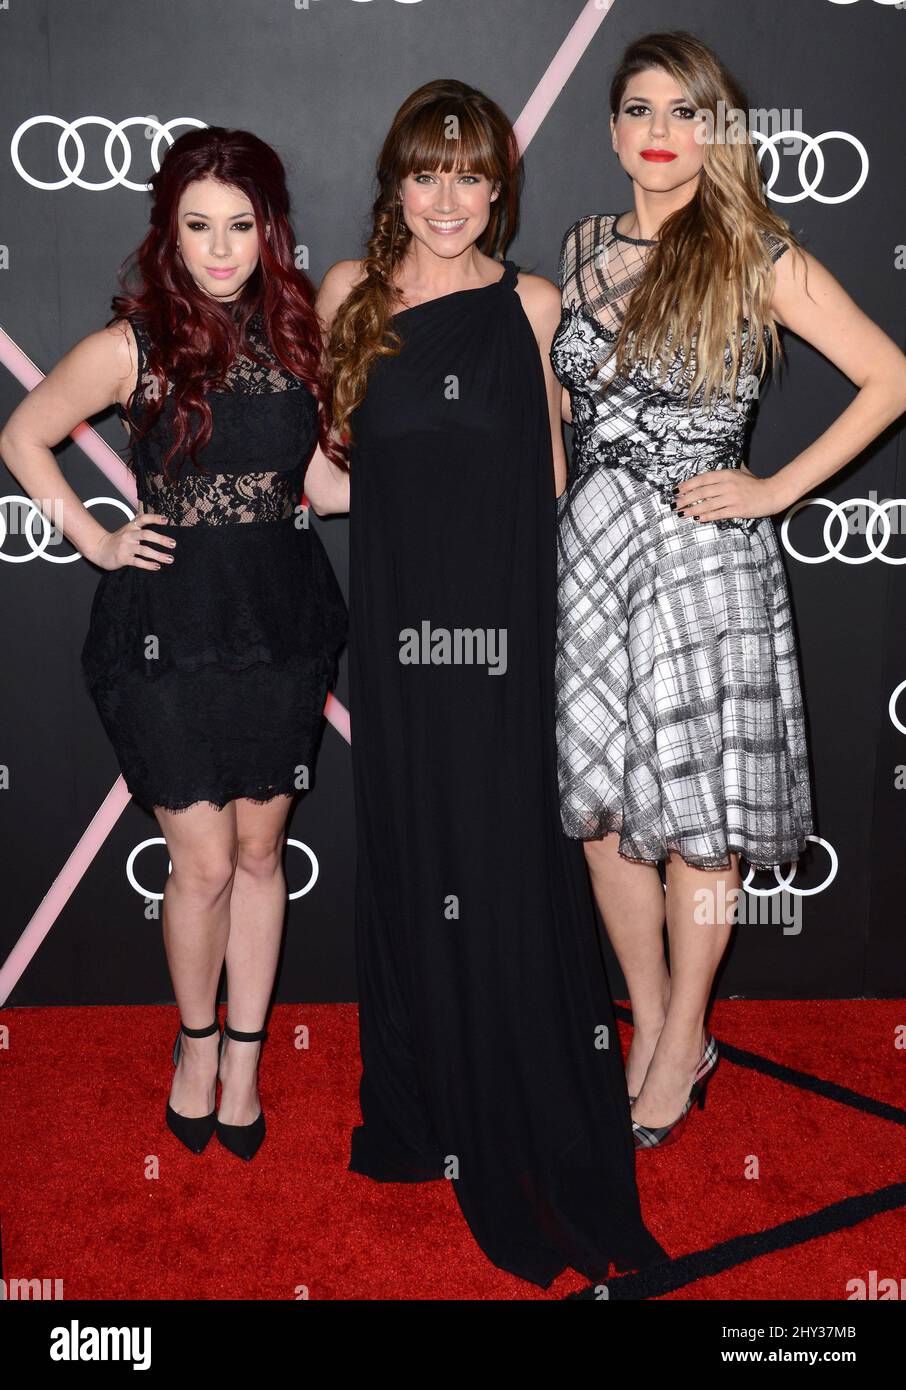 Jillian Rose Reed, Nikki DeLoach, Molly Tarlov attending the Audi Golden Globes 2014 Cocktail Party, held at Cecconi's inWest Hollywood, California. Stock Photo